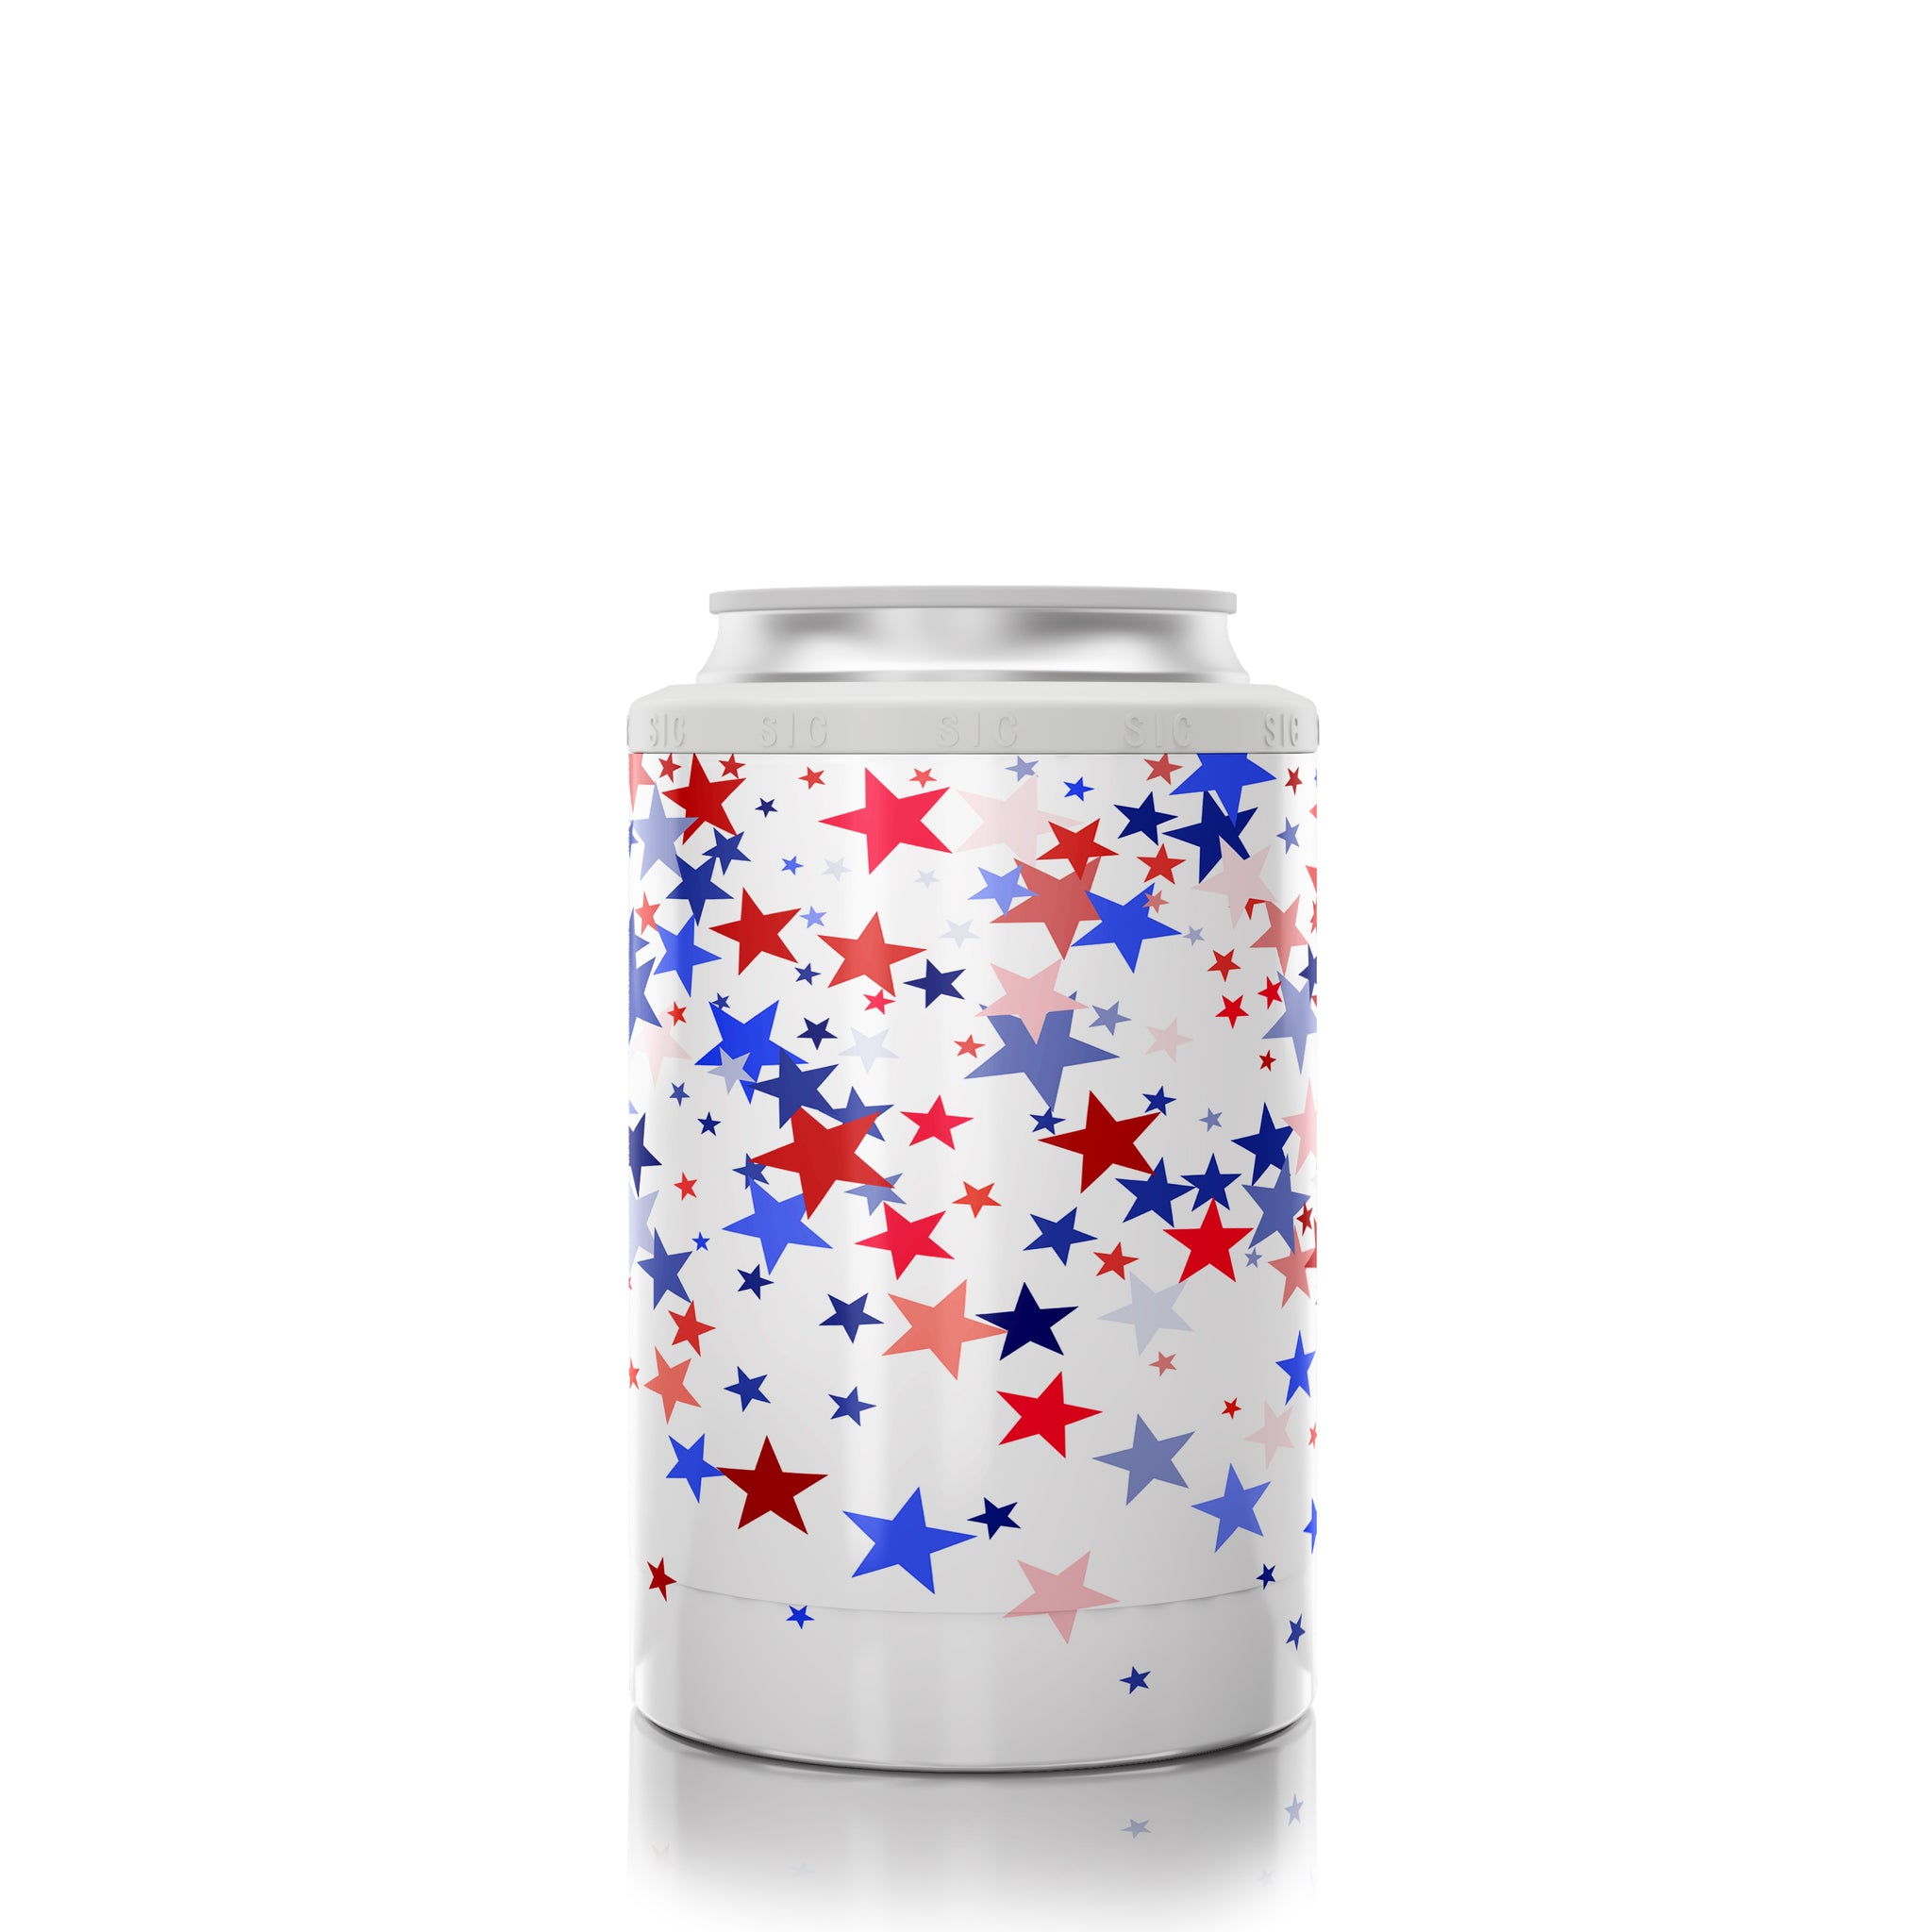 12 oz. Can Cooler Falling stars